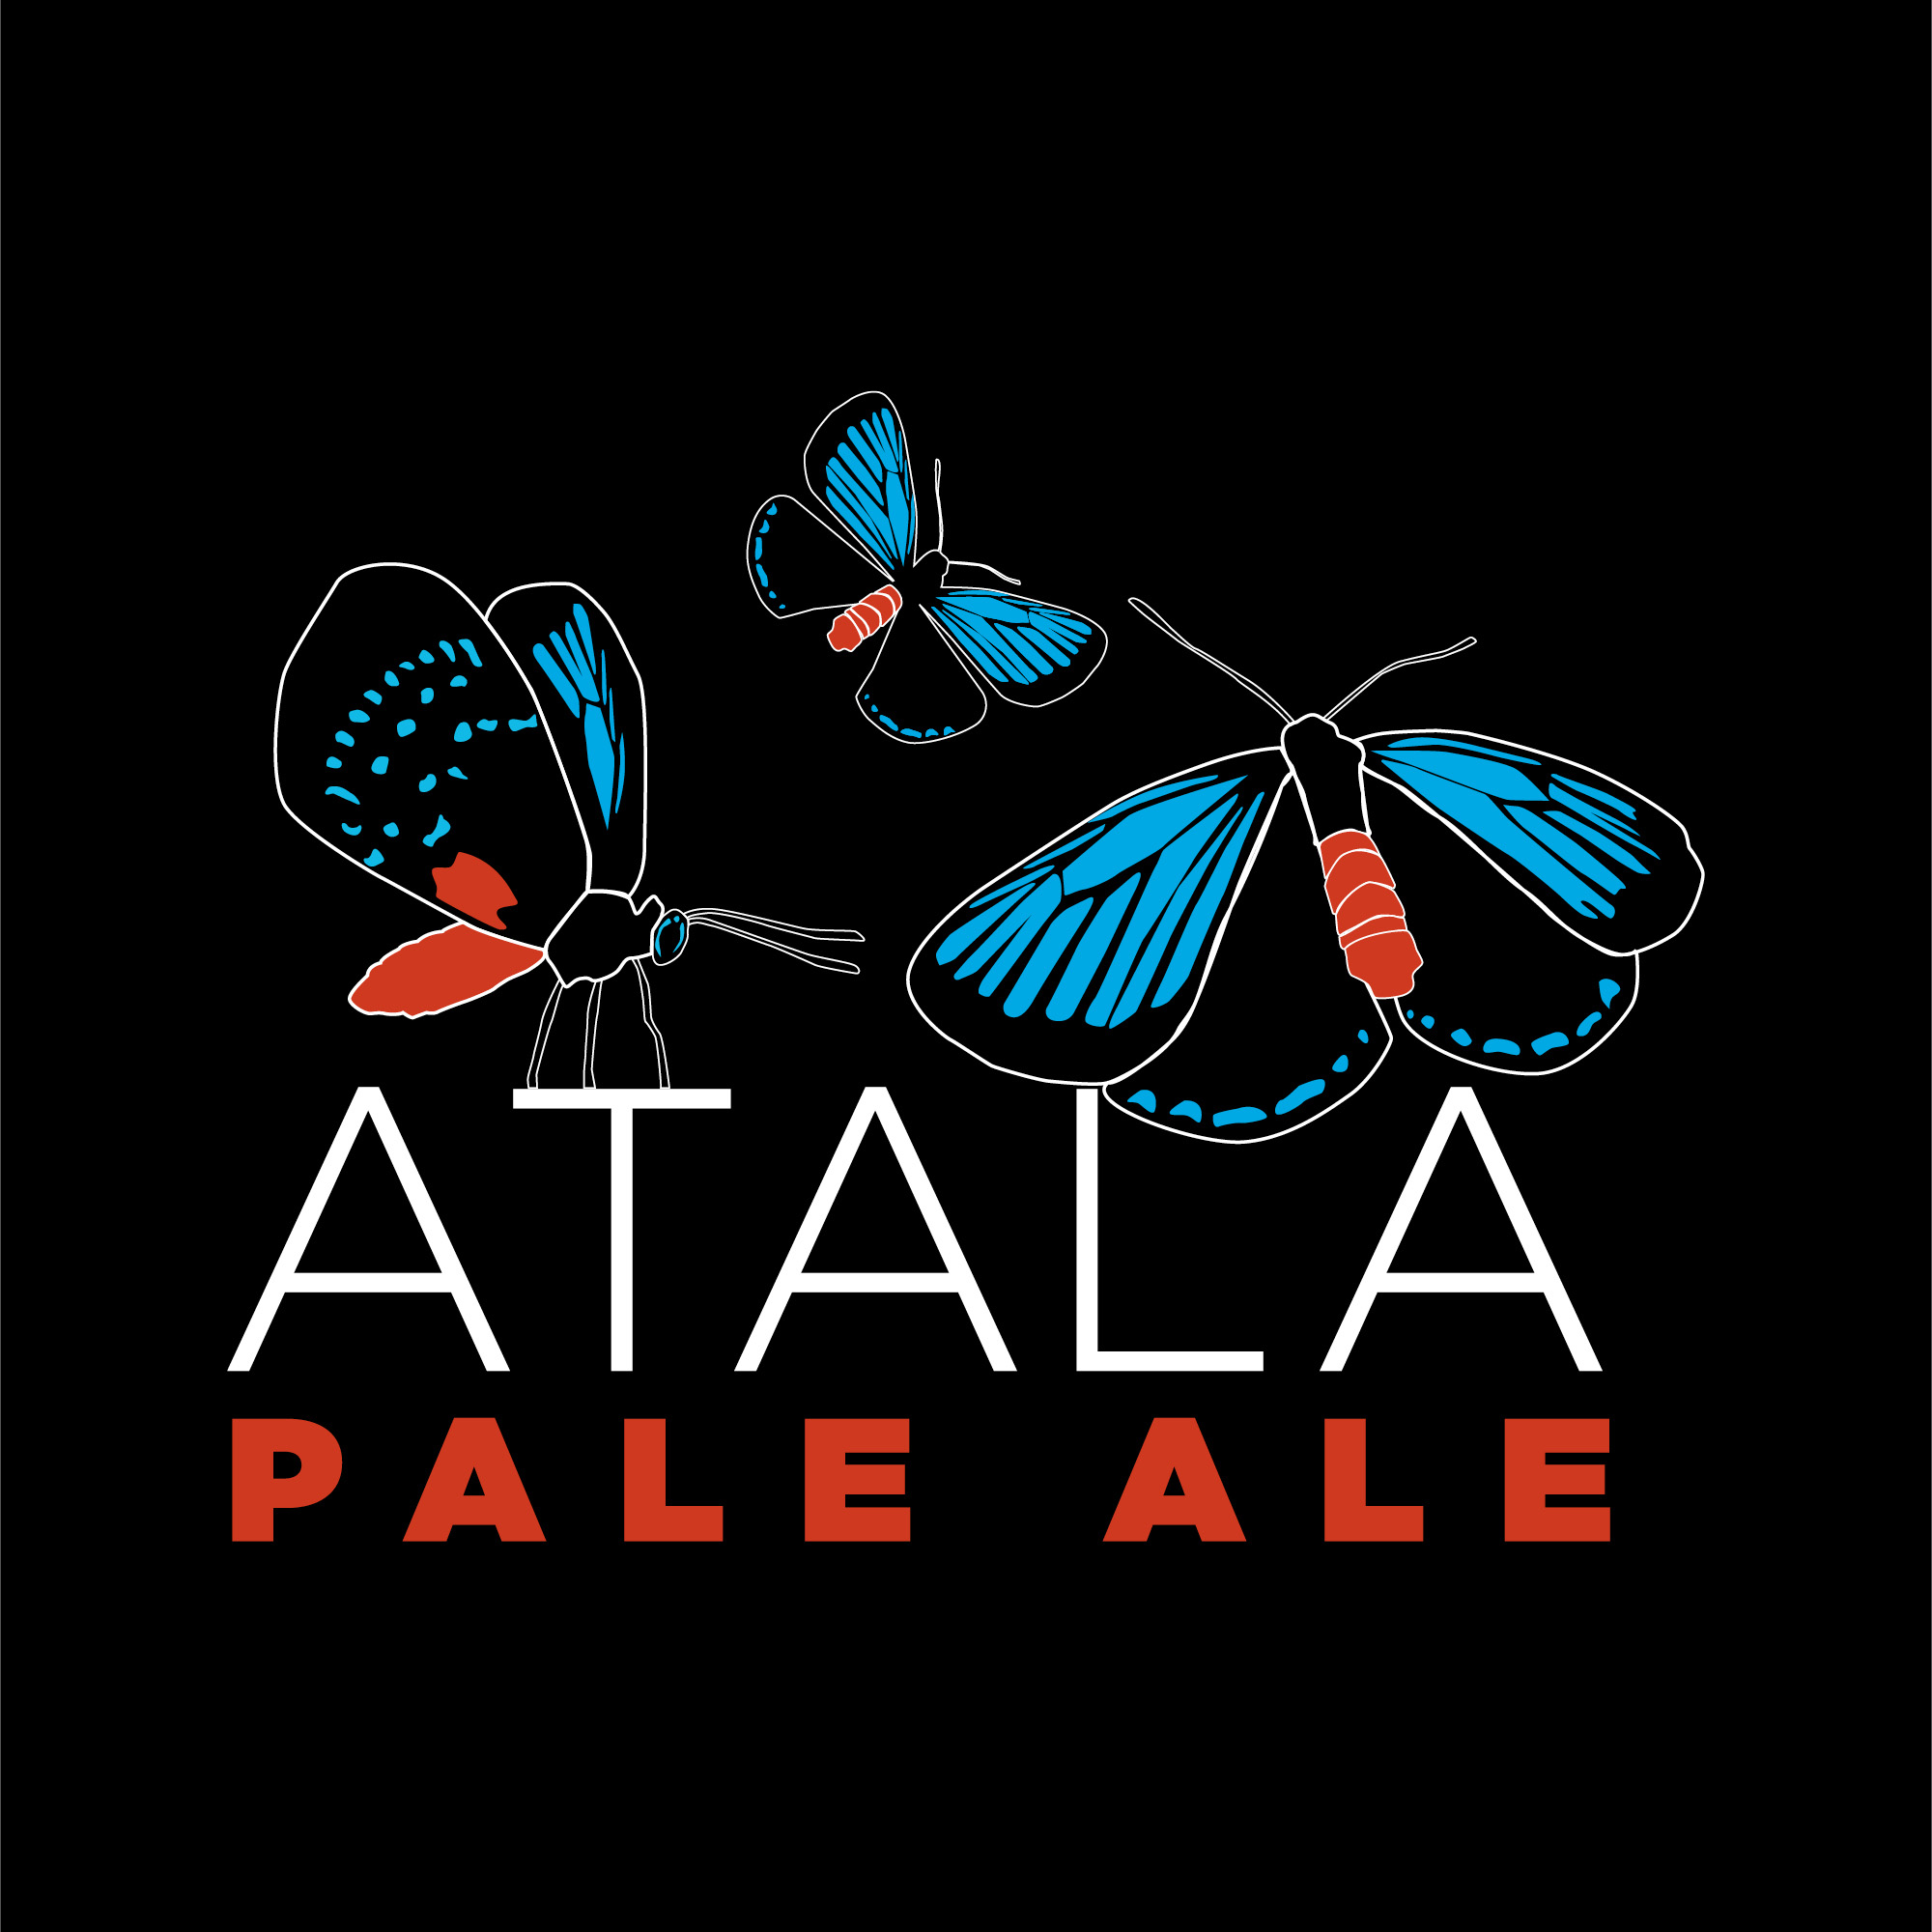 Atala Pale Ale beer logo showing blue, black and red butterfly.